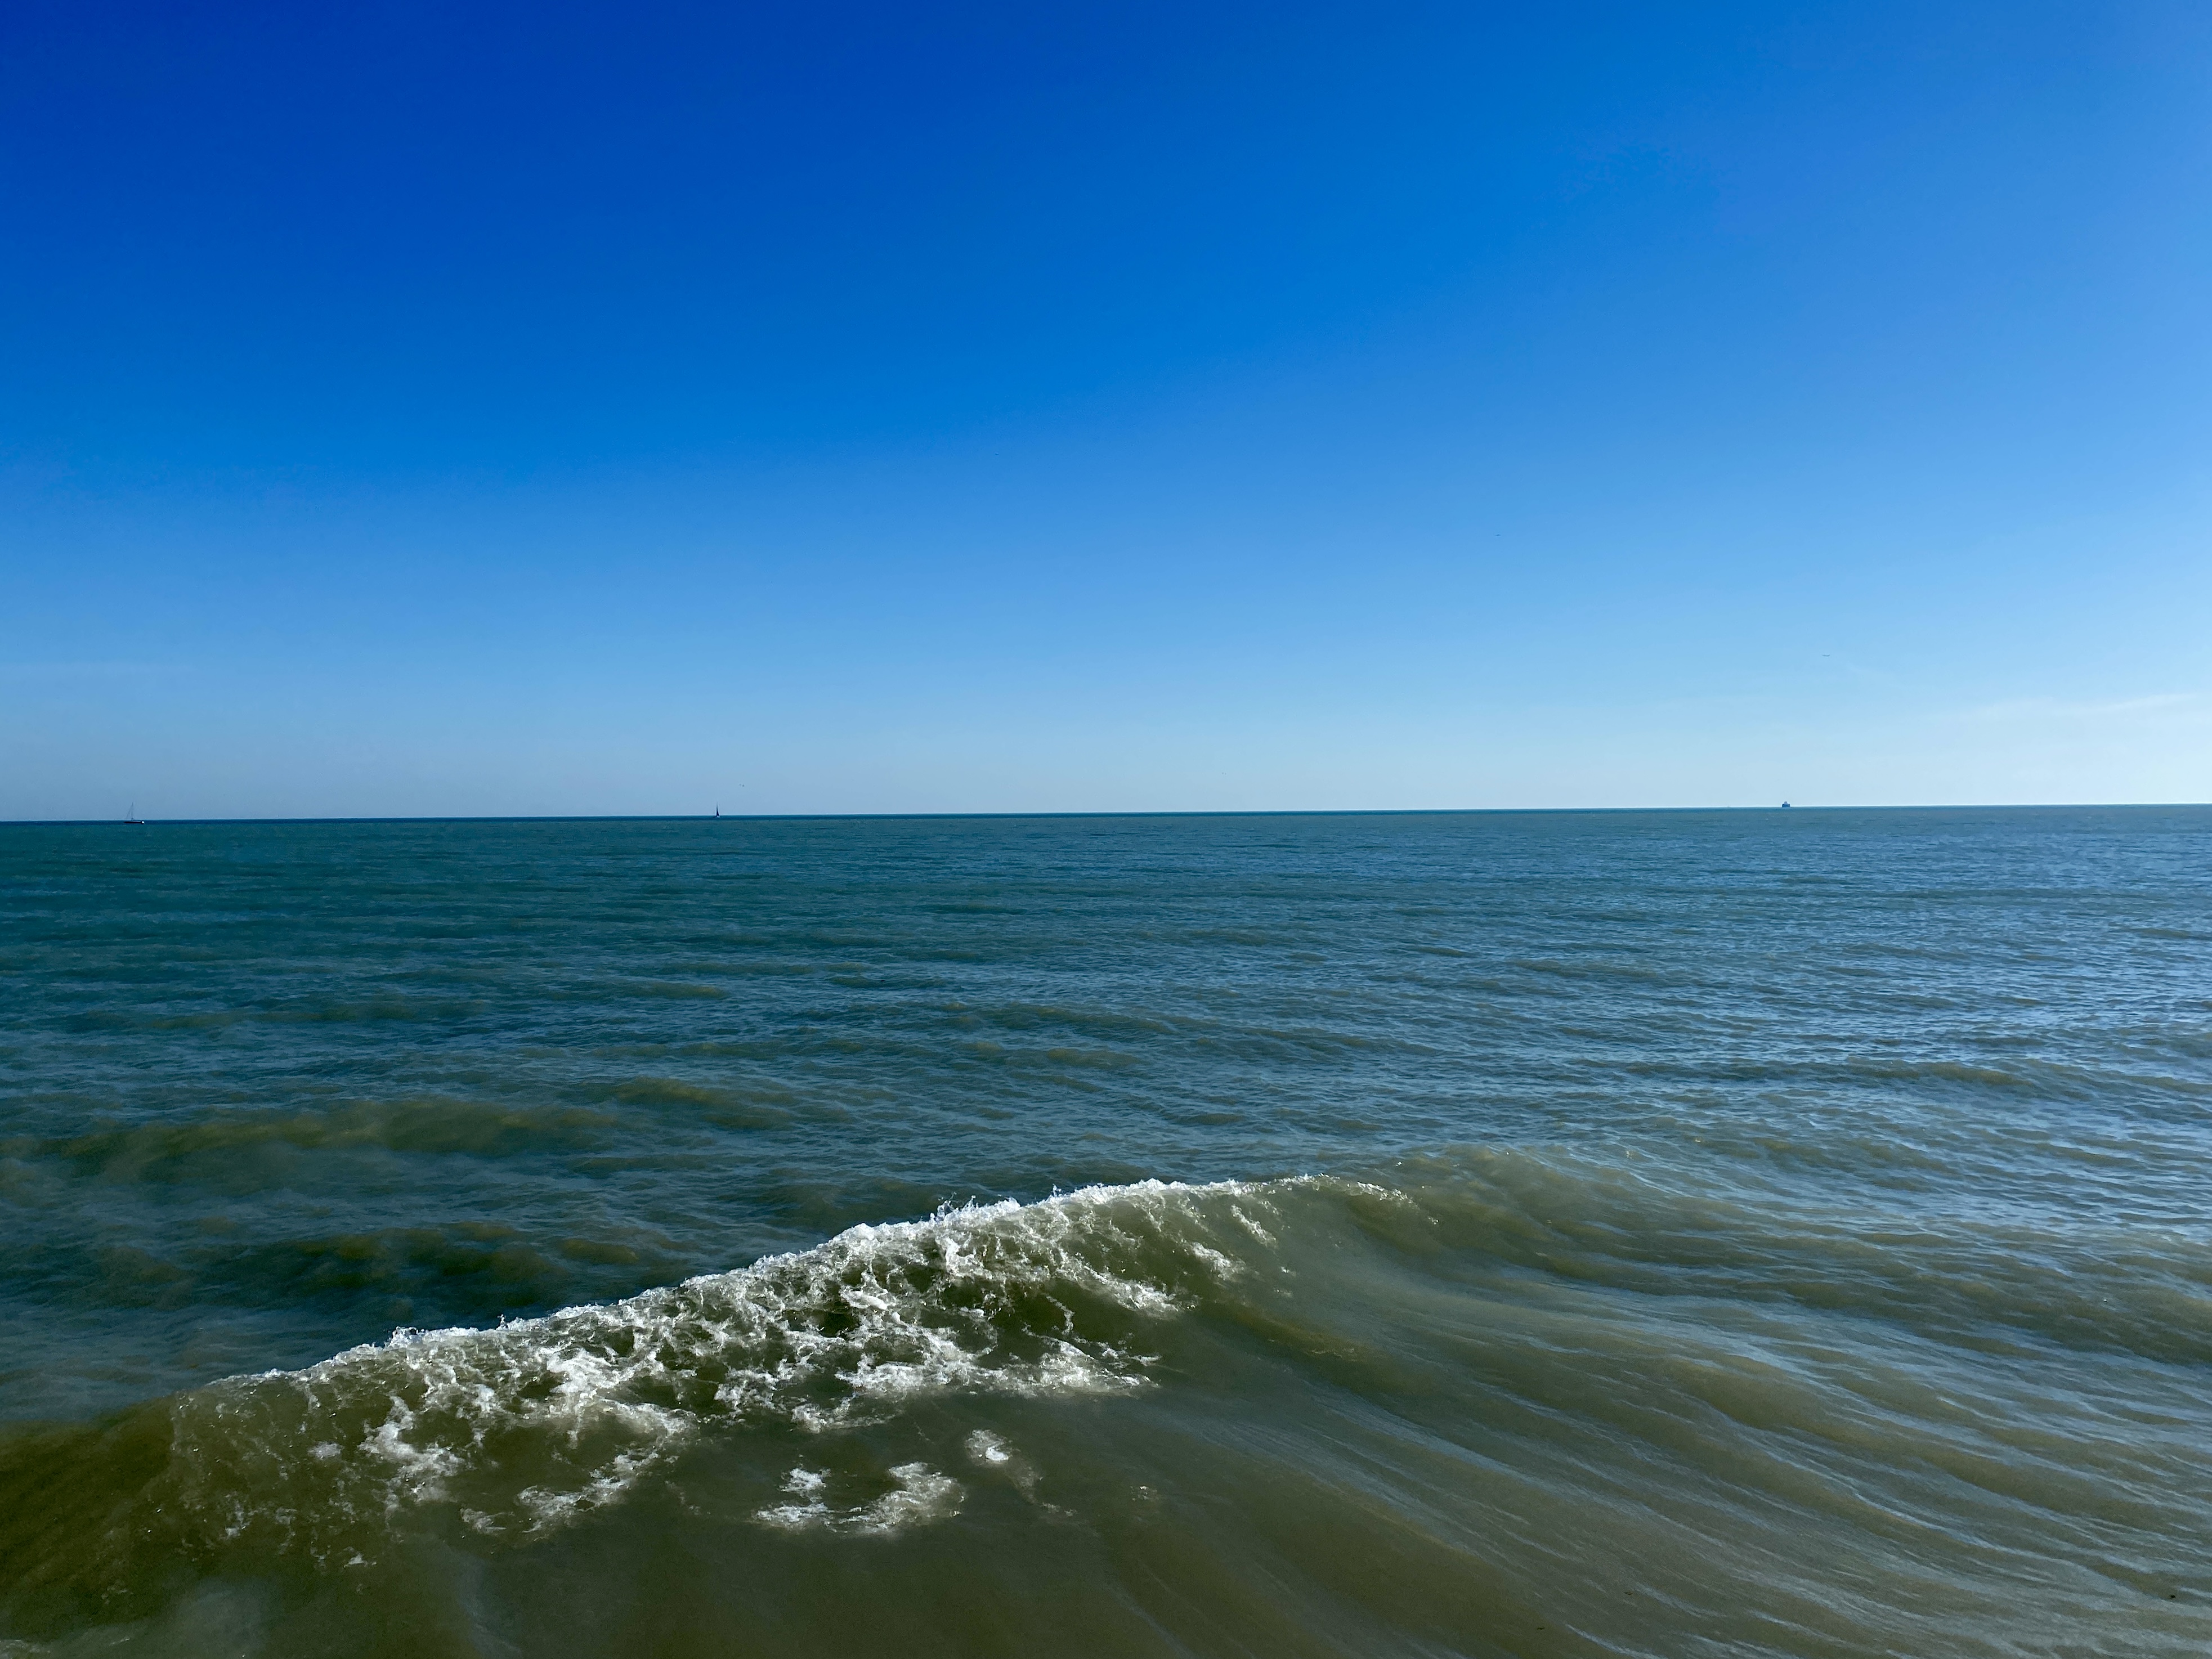 A wide lake horizon with a clear, bright blue sky and a slanted line of a wave in the deep green water